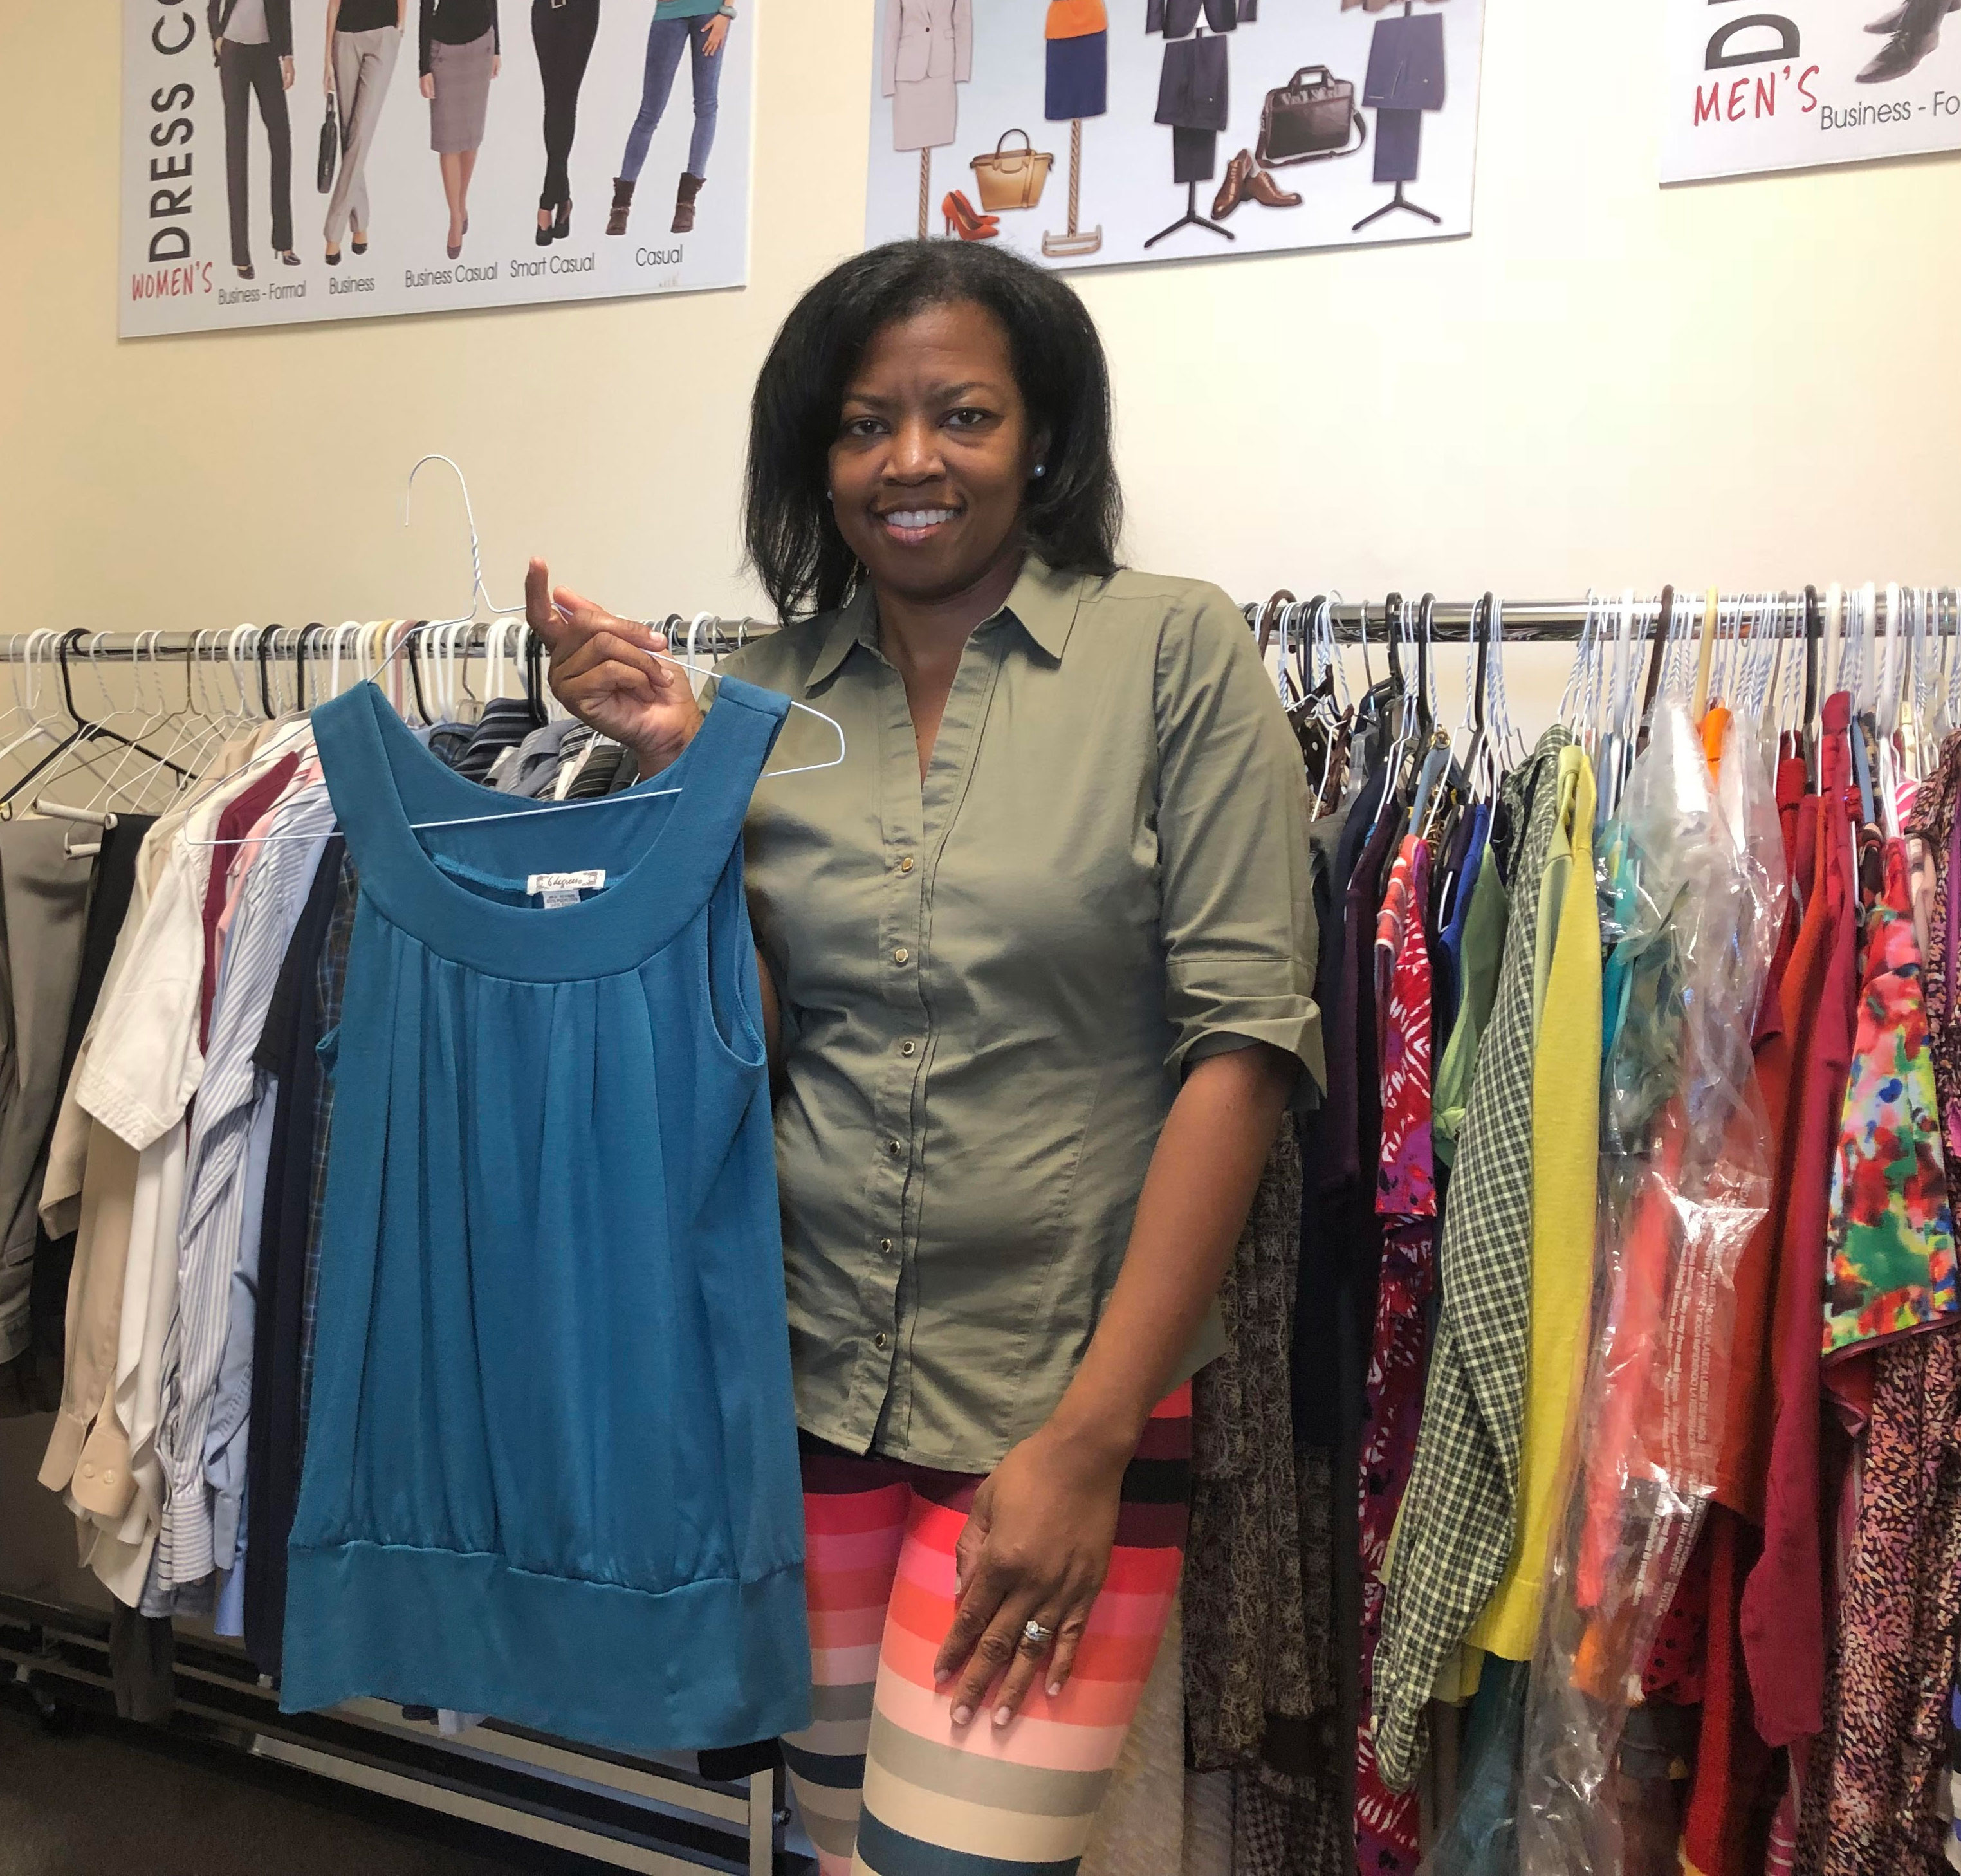 New Career Closet looks to boost students’ confidence - Inland Empire ...